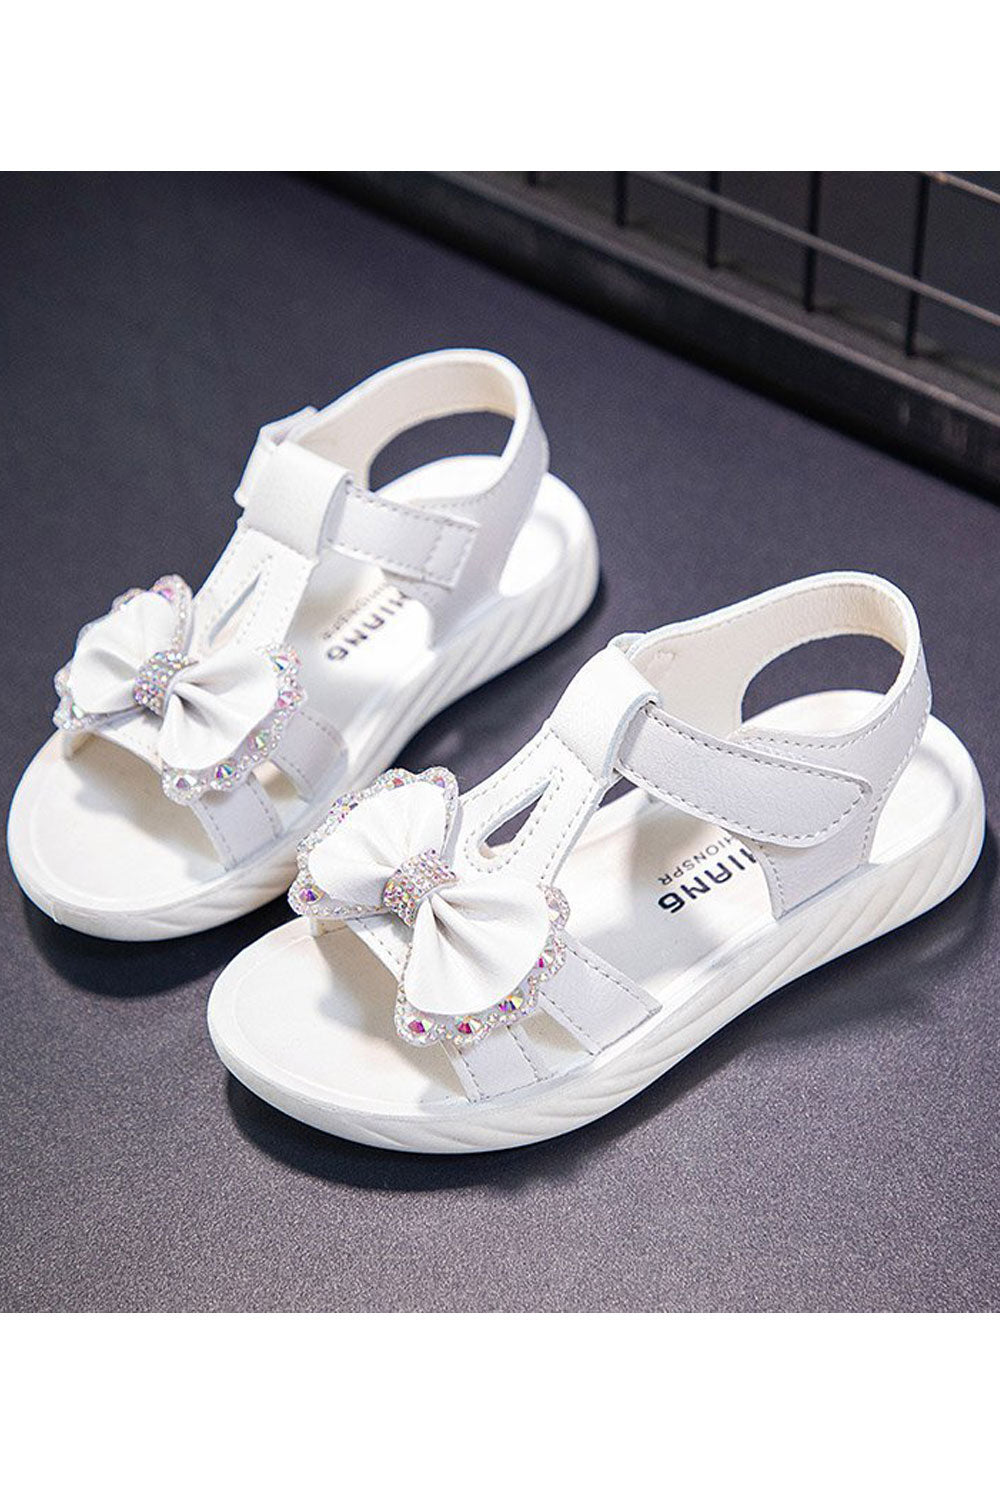 Youth Girls Comfortable Bow Decorated Solid Colored Summer Lovely Sandals - YGSD107214